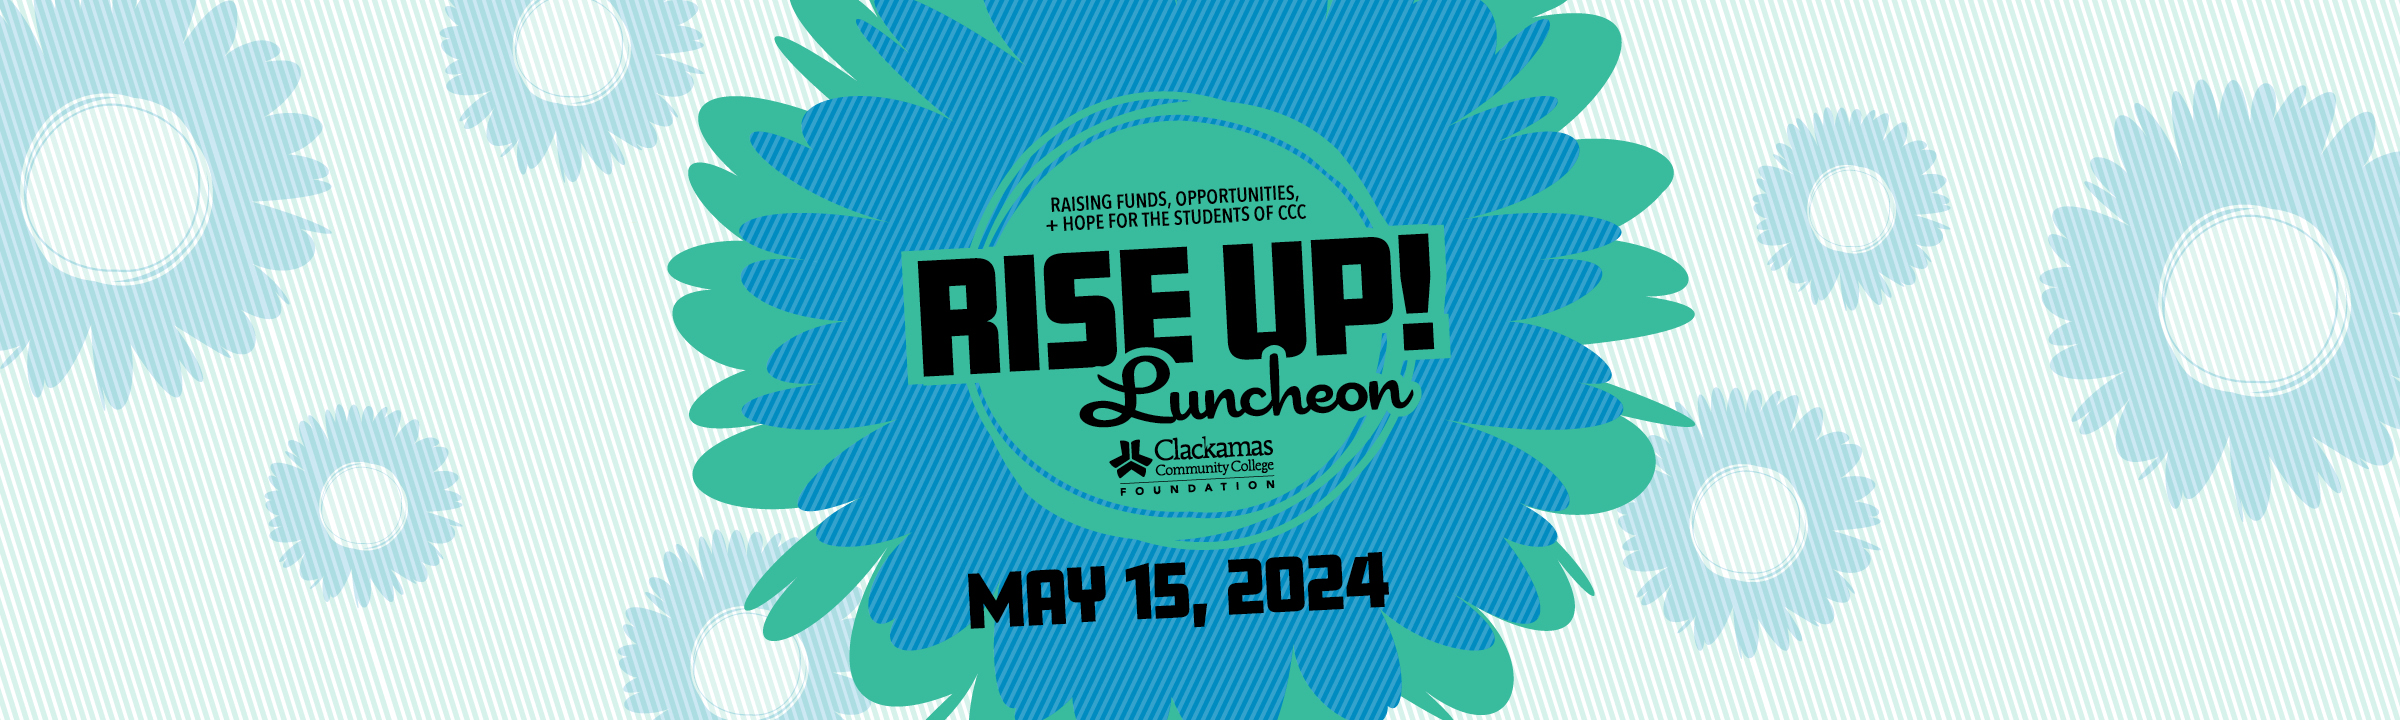 RiseUp! 2024 Save date_front